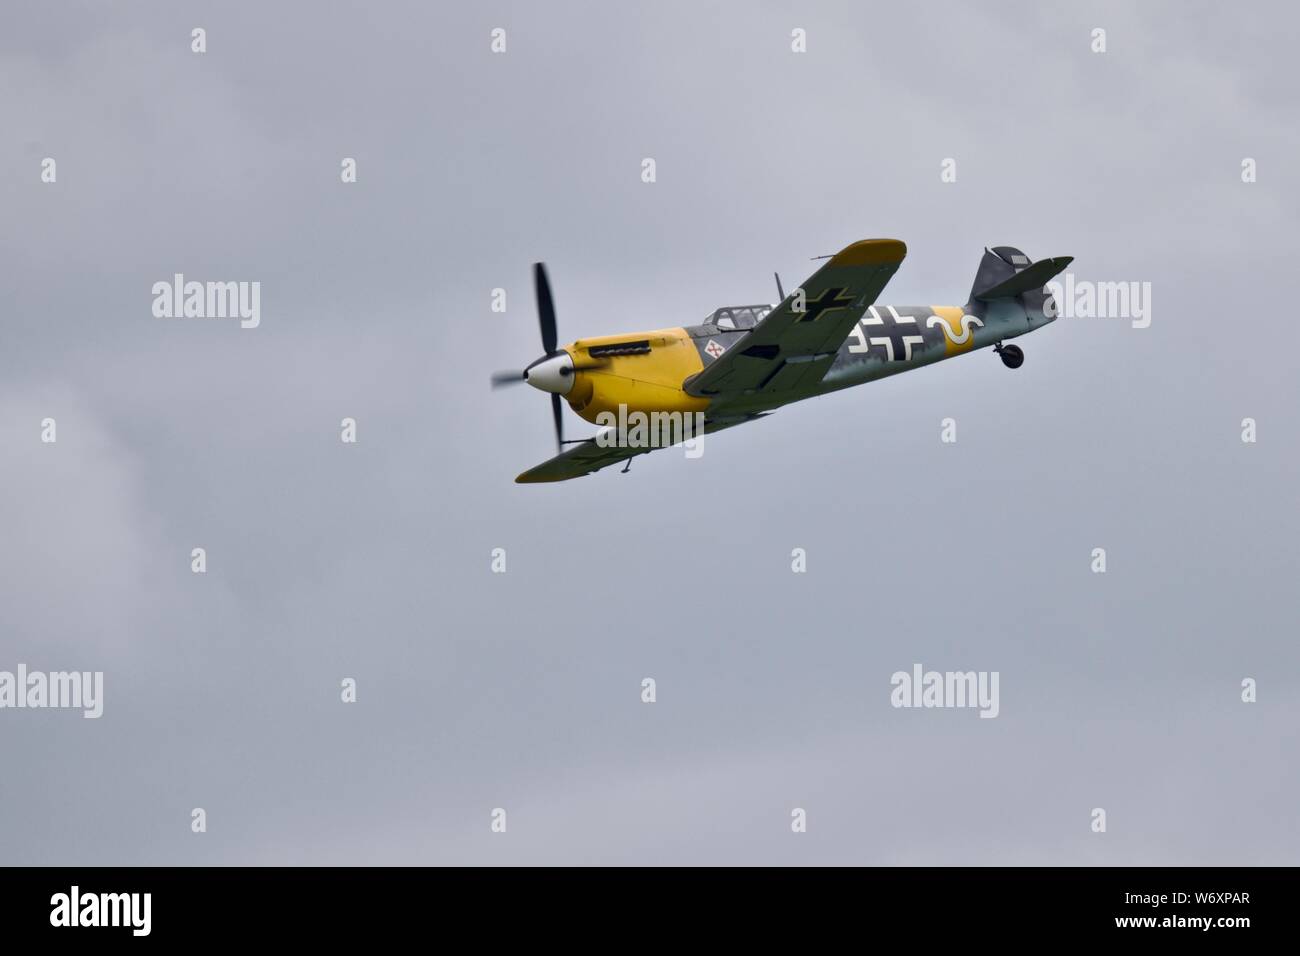 Hispano Aviación HA-1112 ‘White 9’ airborne at the 2019 Flying Legends Stock Photo